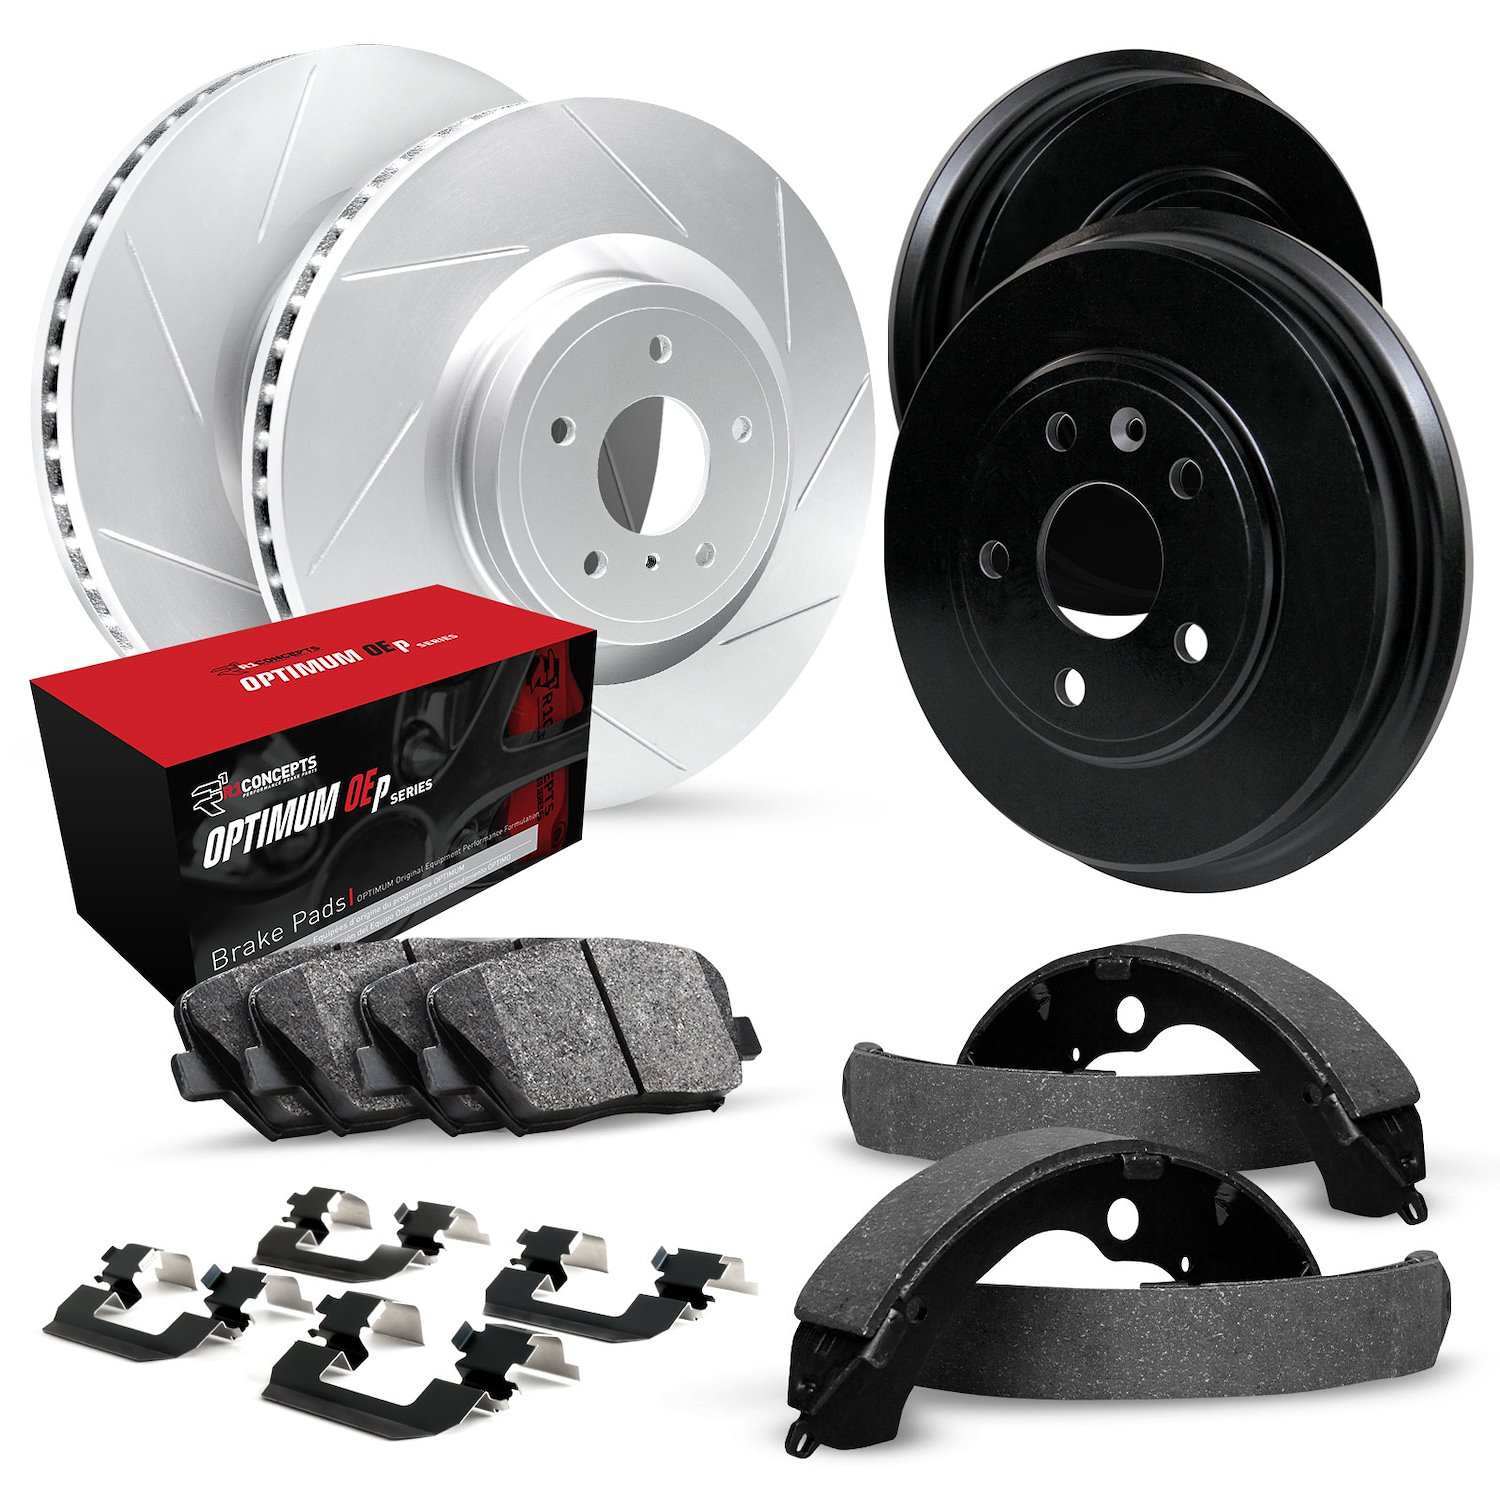 GEO-Carbon Slotted Brake Rotor & Drum Set w/Optimum OE Pads, Shoes, & Hardware, 1978-1990 GM, Position: Front & Rear